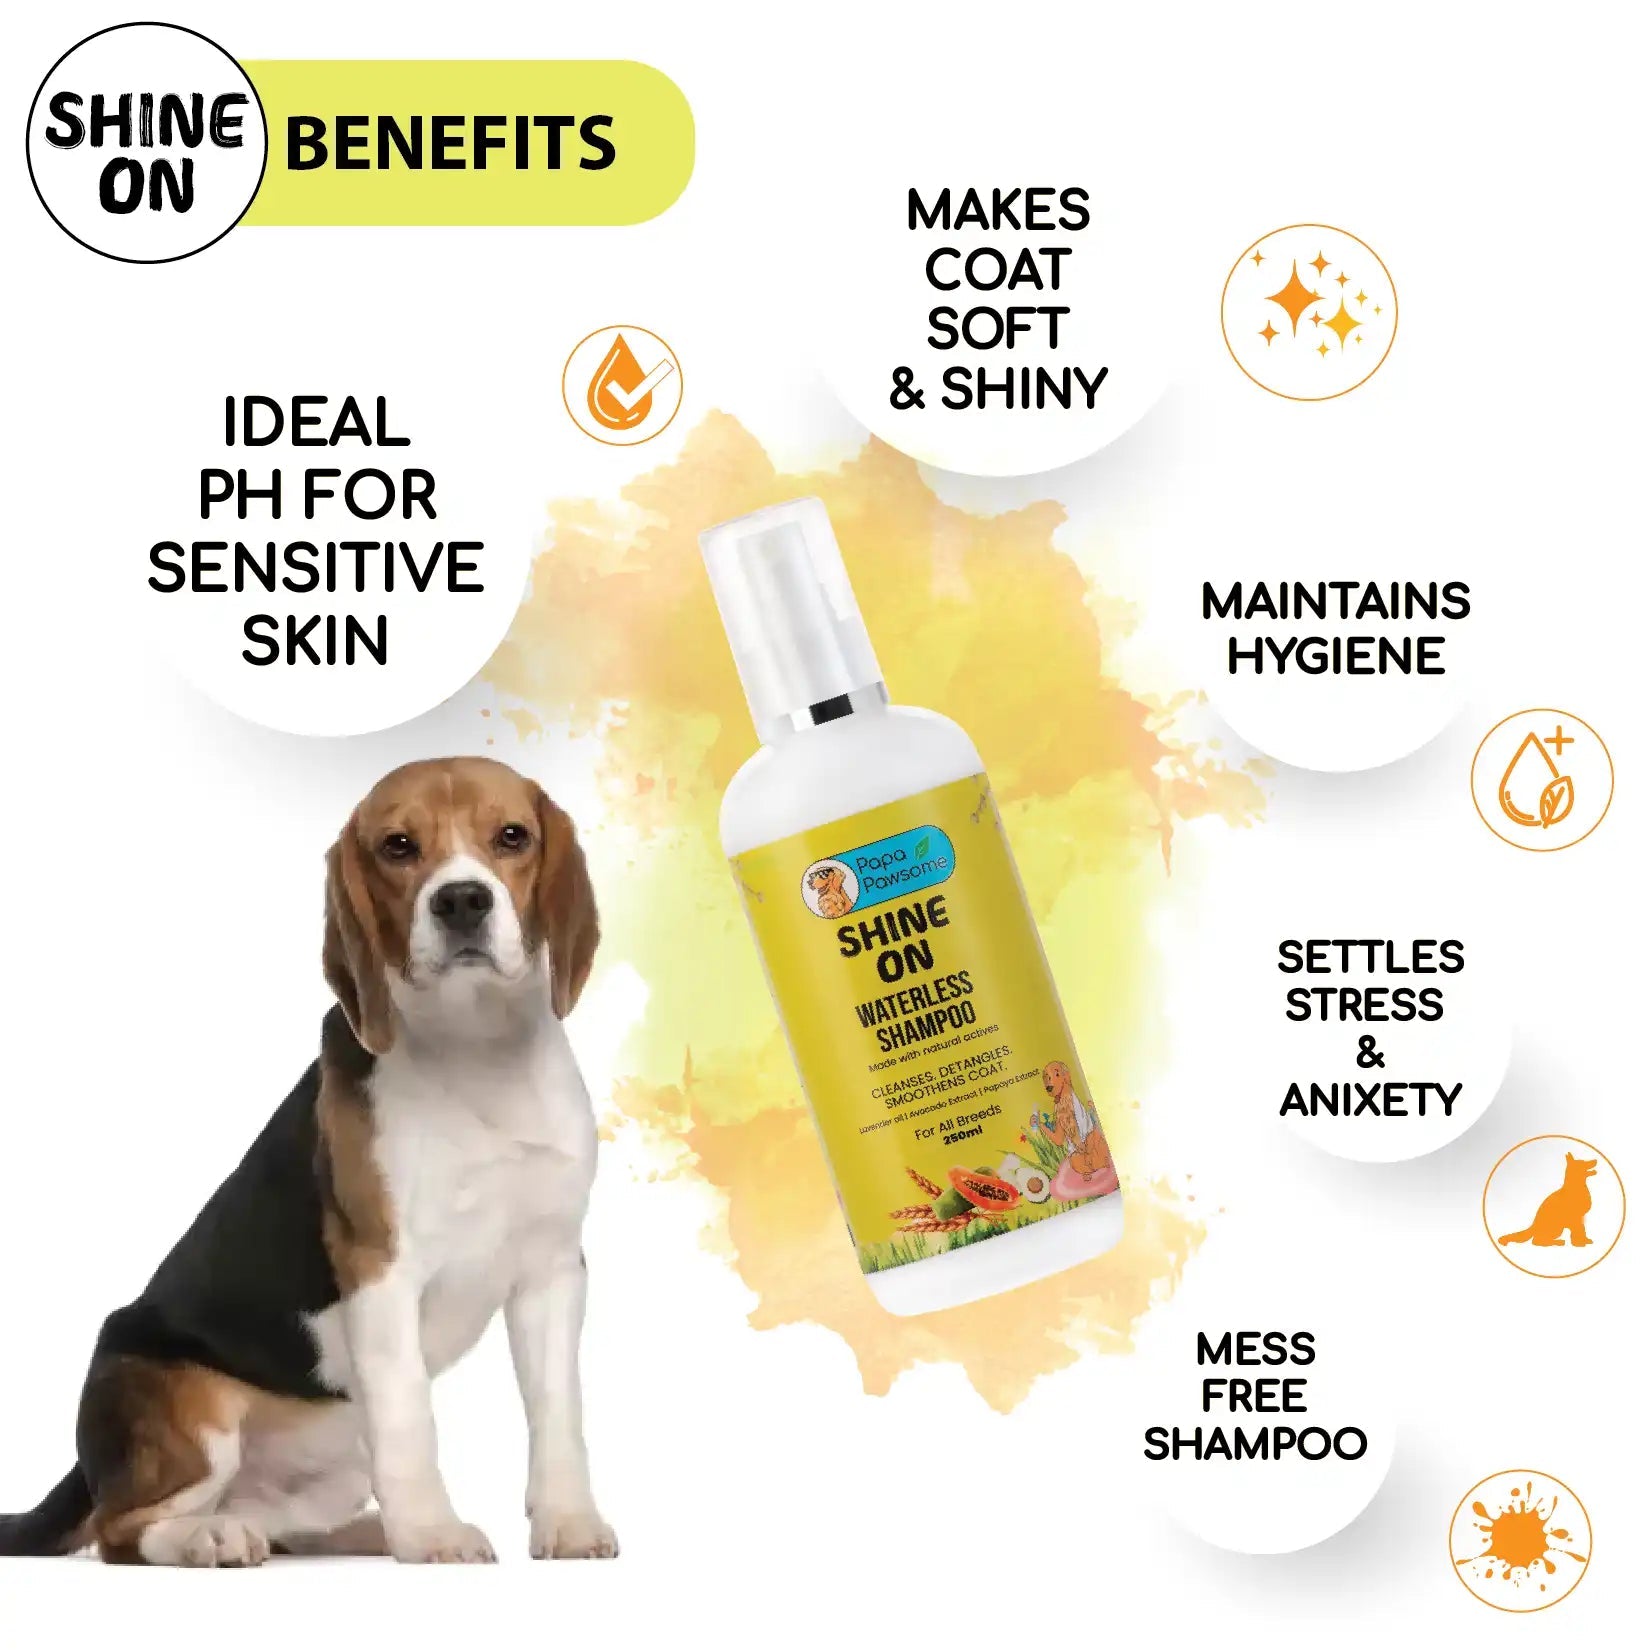 Beagle Complete Grooming kit - Papa Pawsome